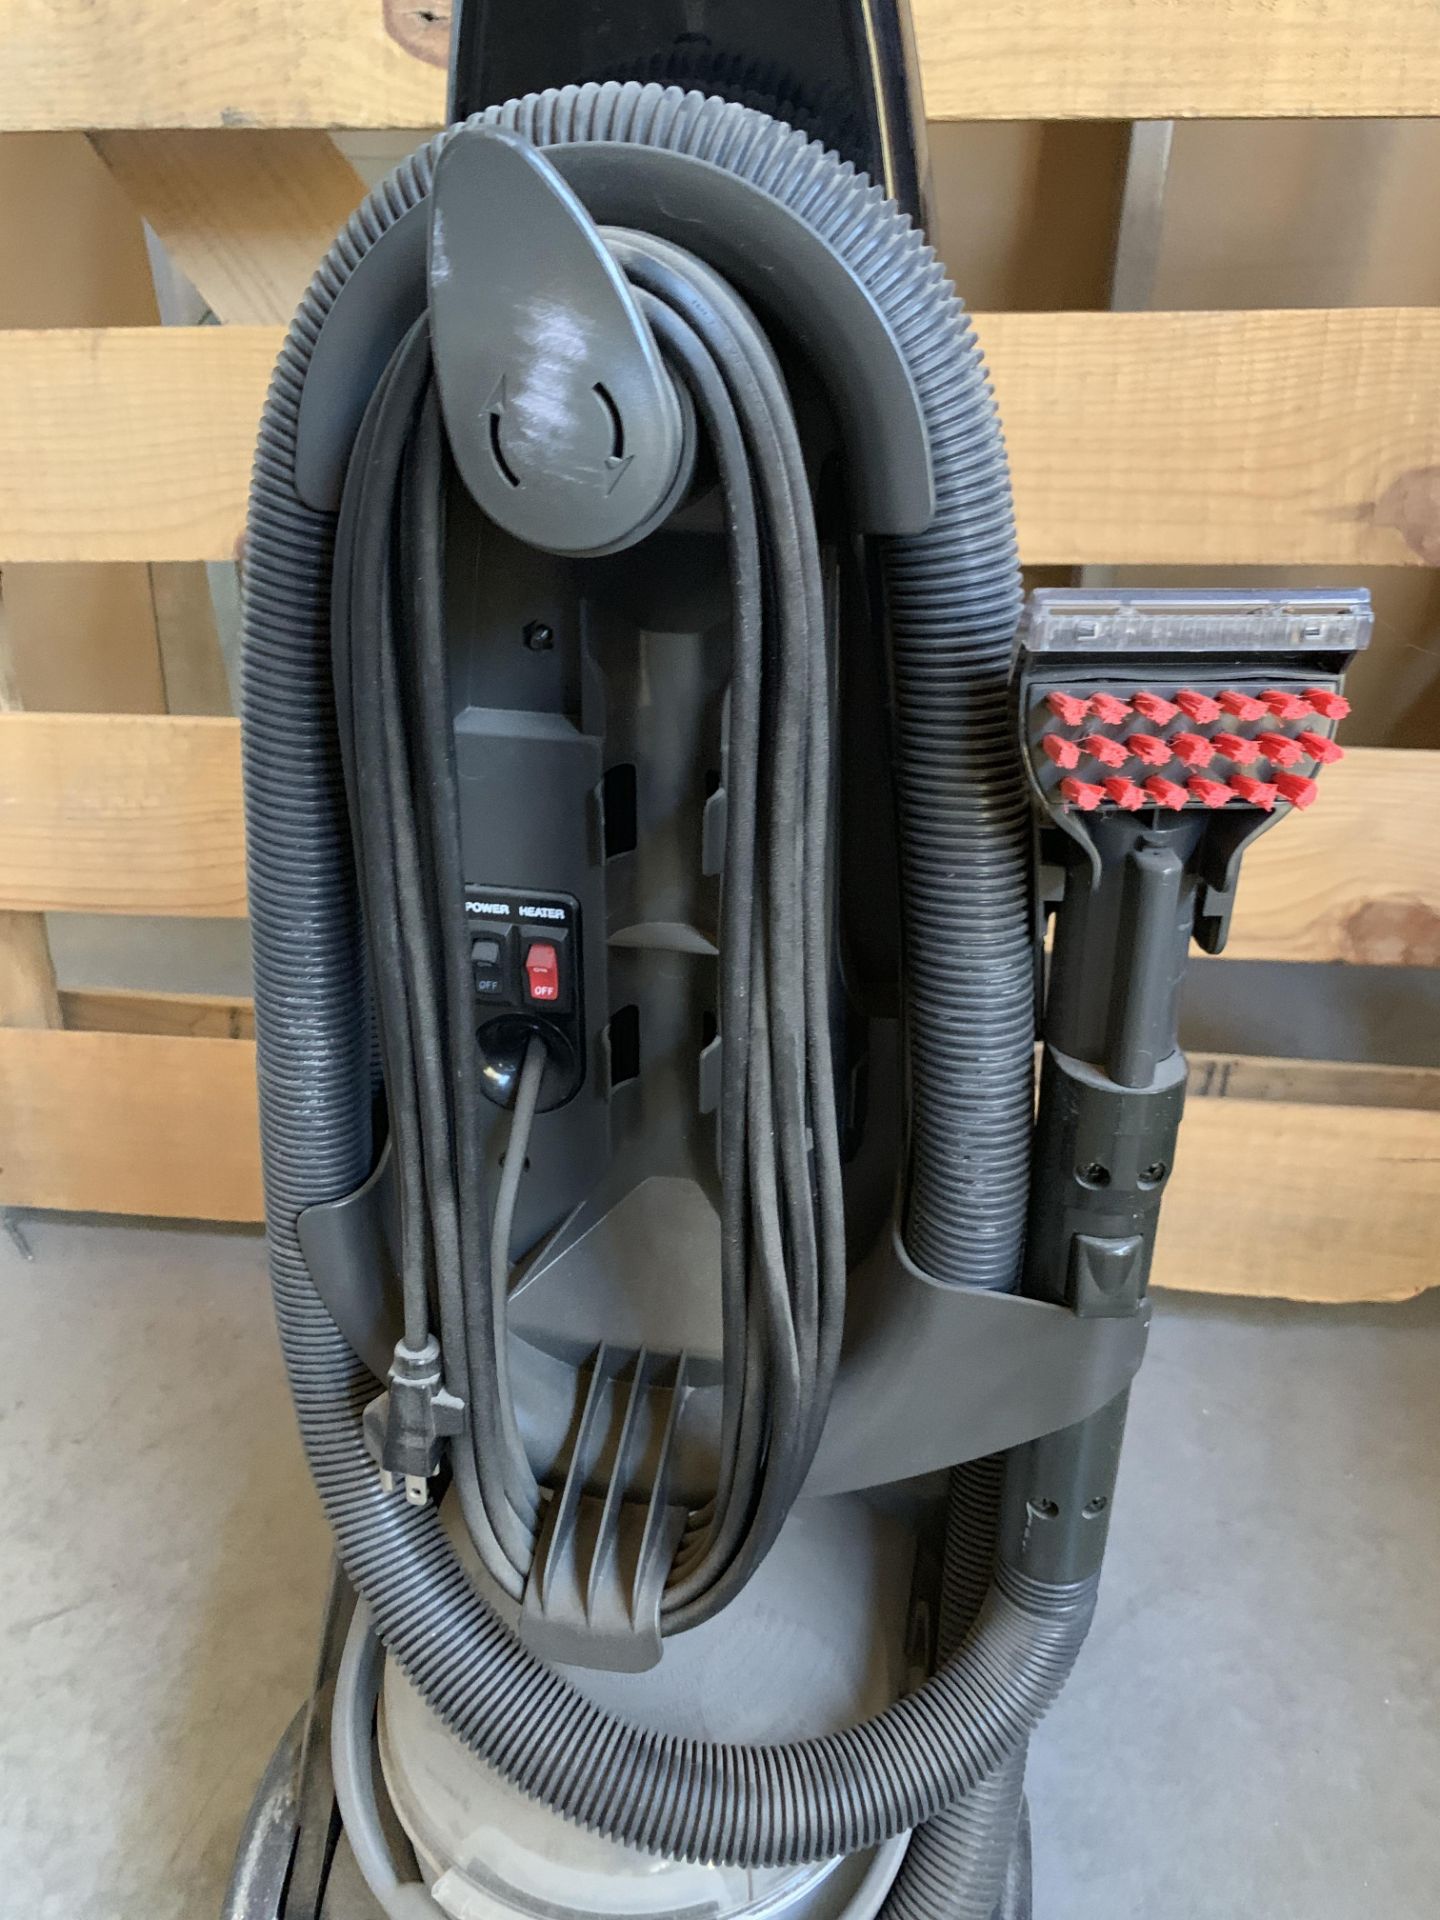 Bissell Pro Heat 12 amp Vacuum Dirtlifter PowerBrush with hose and attachments - Image 6 of 7